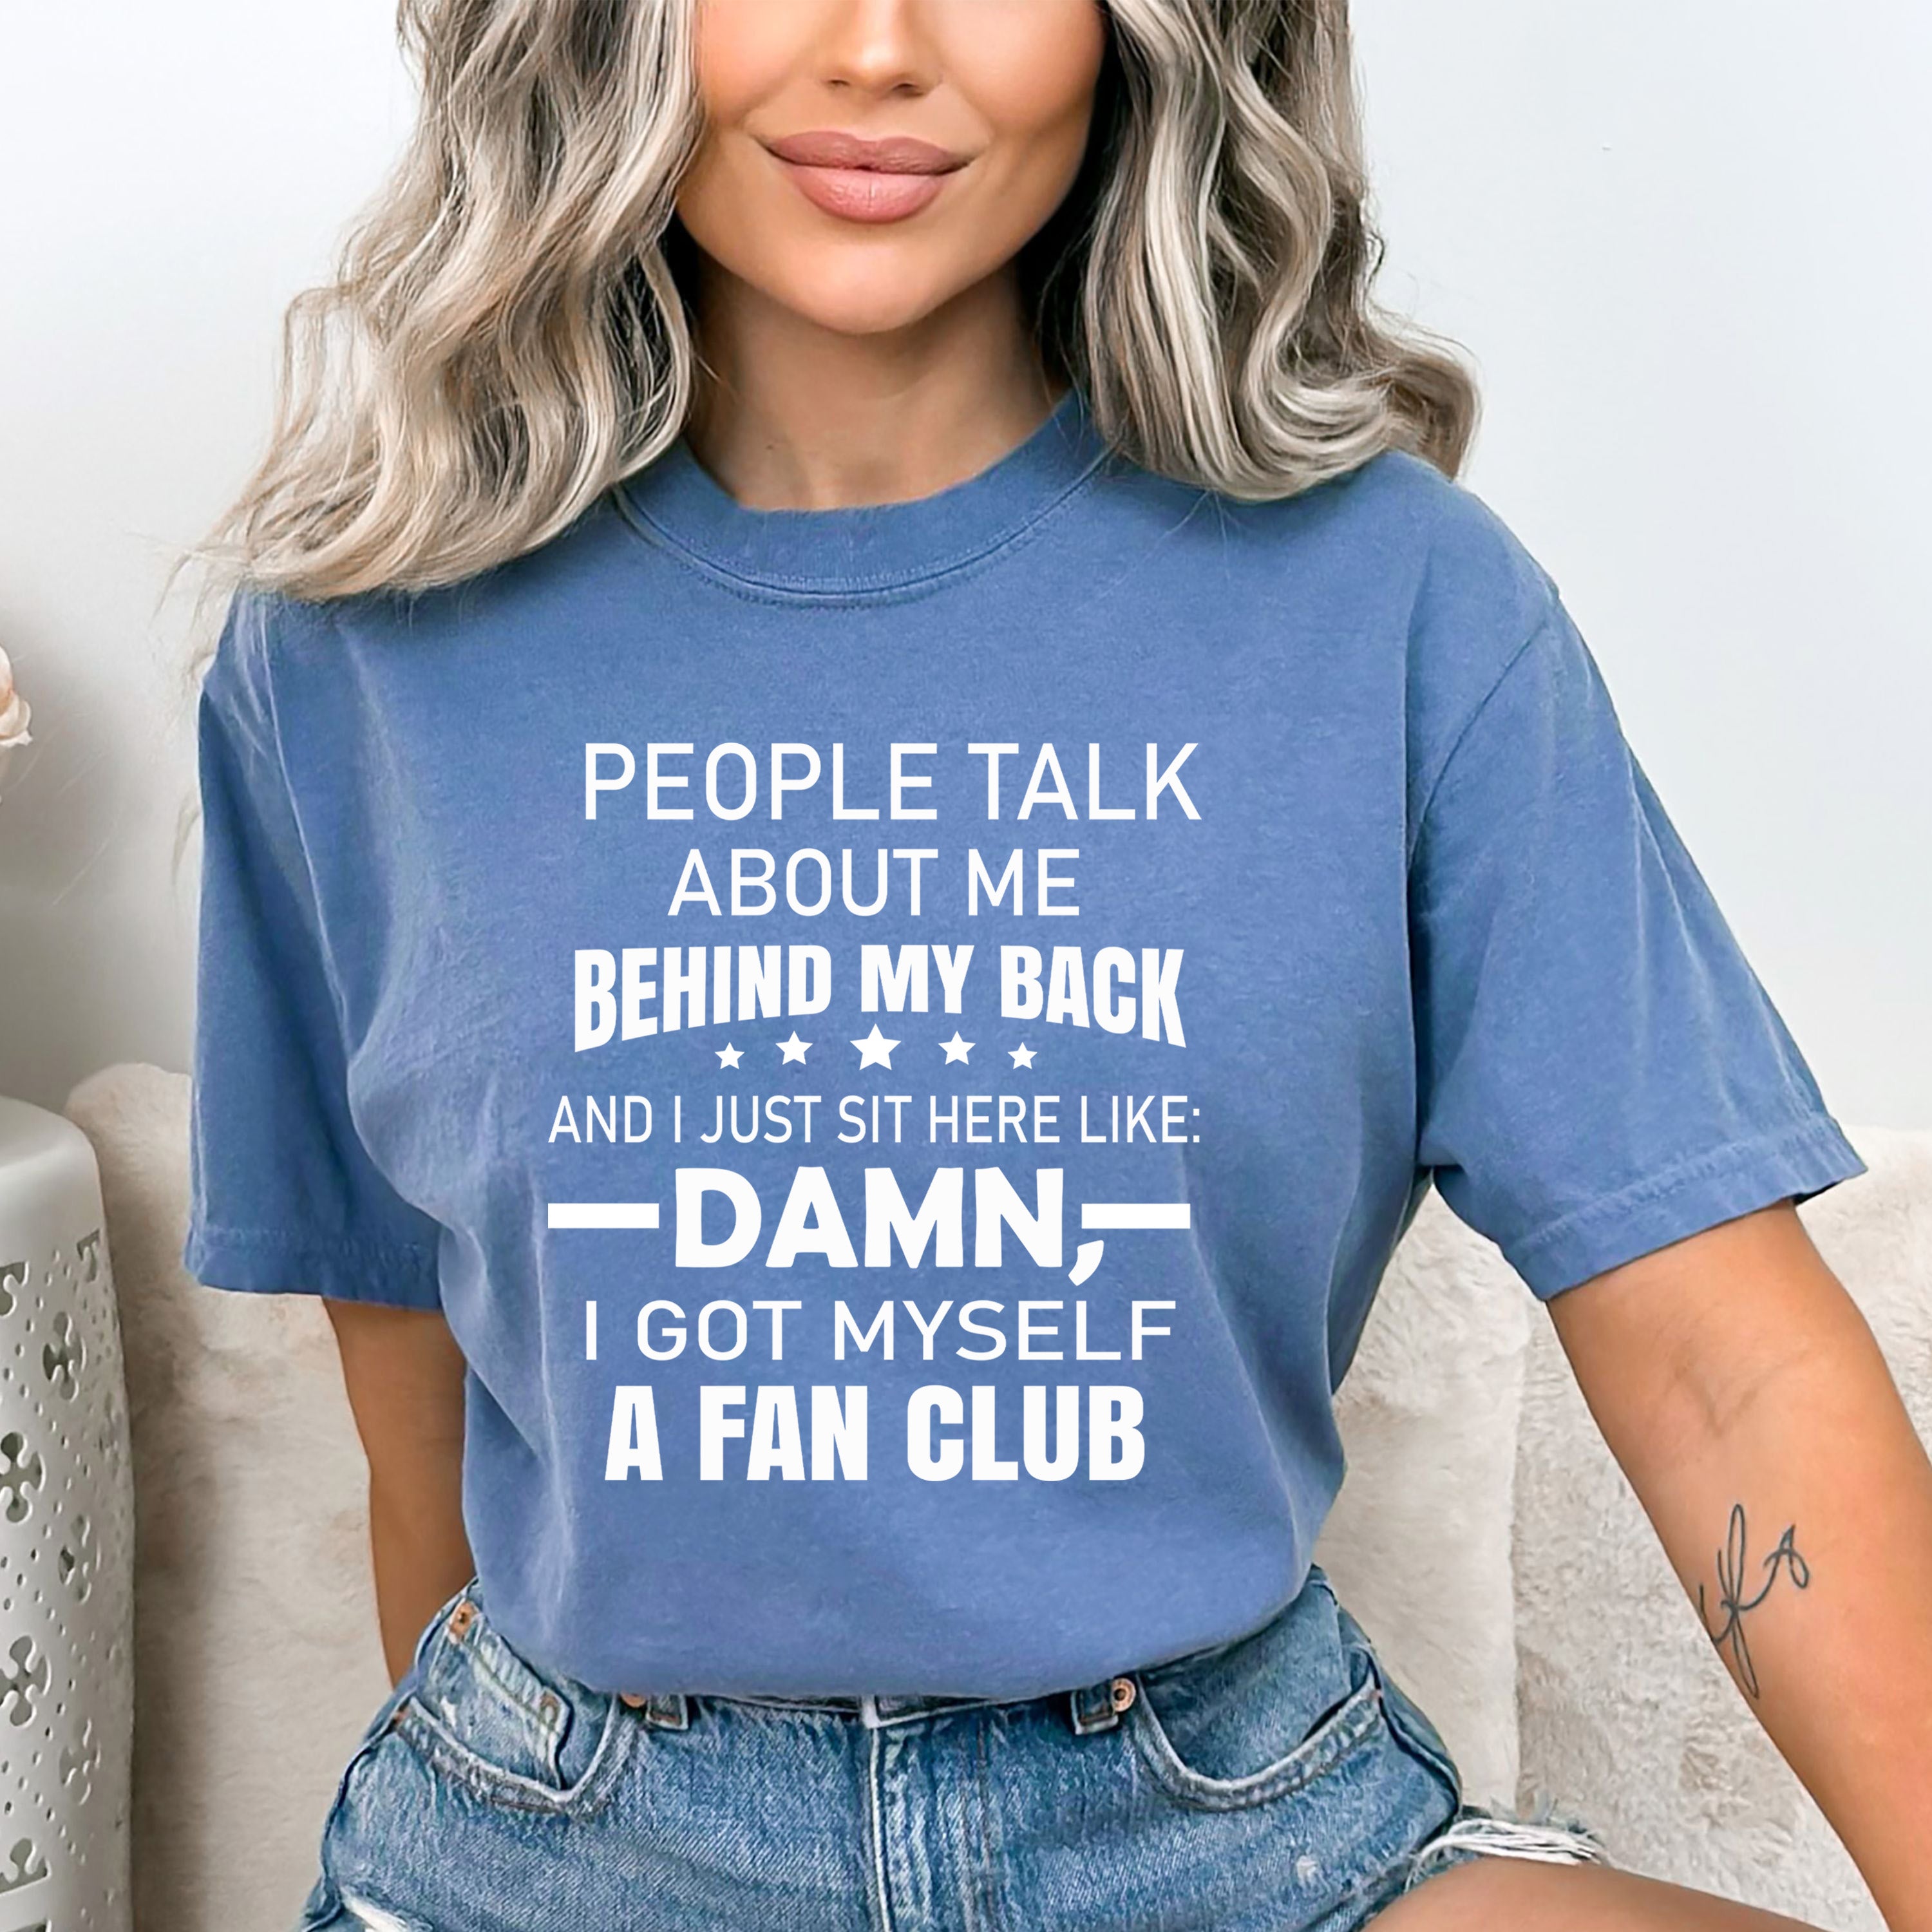 People Talk About Me Behind My Back - Bella canvas